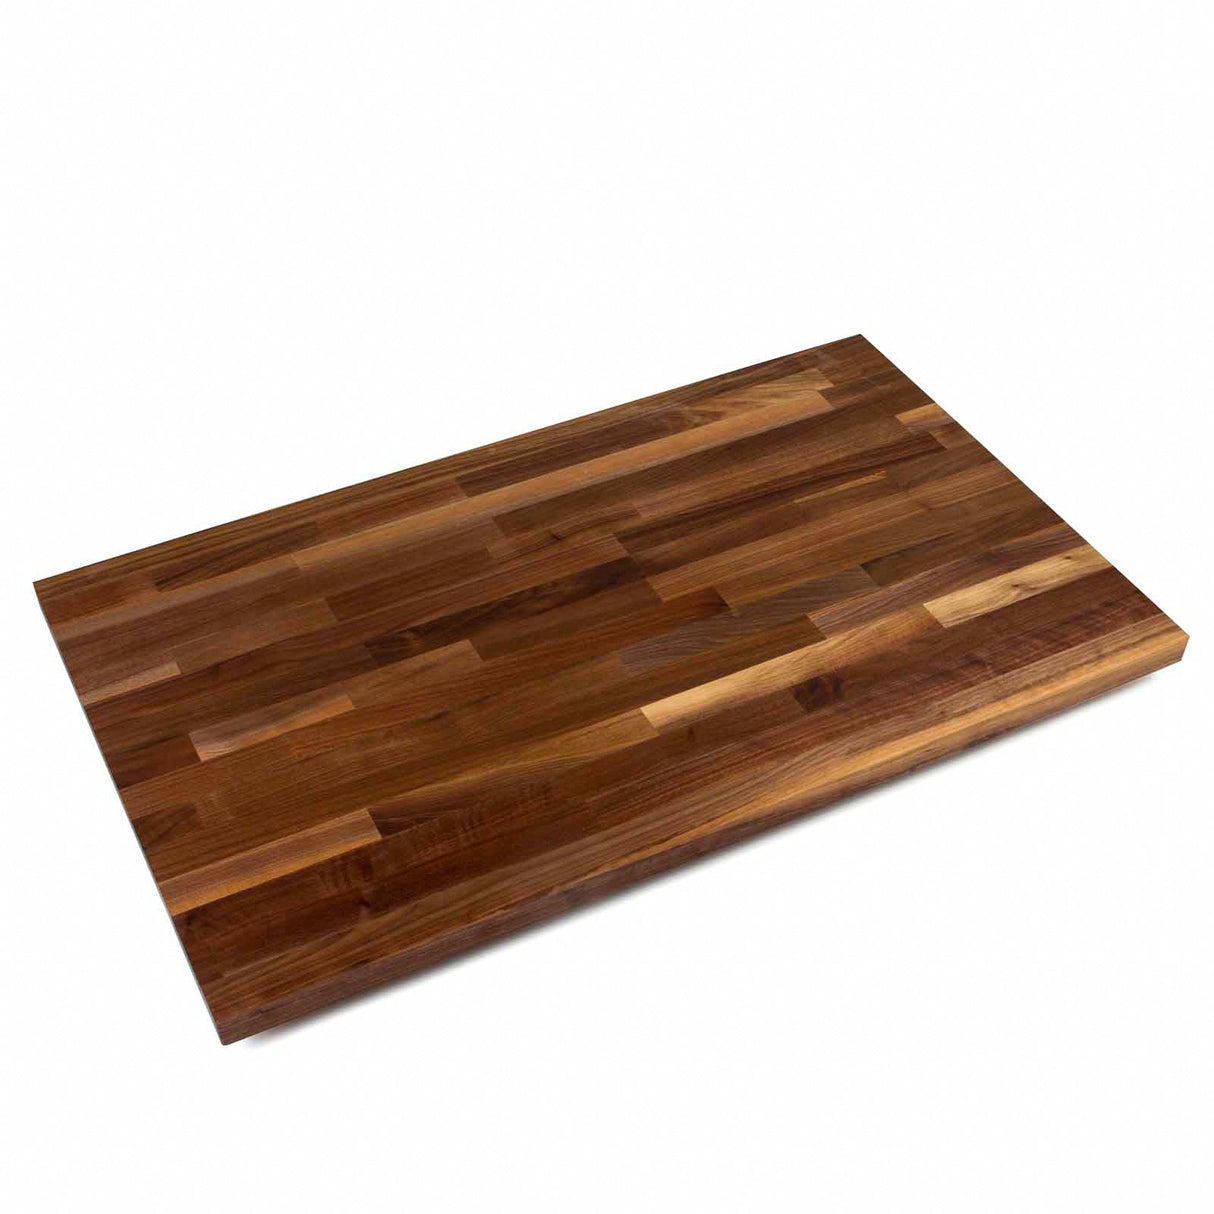 John Boos WALKCT-BL4225-O Blended Walnut Counter Top with Oil Finish, 1.5" Thickness, 42" x 25"